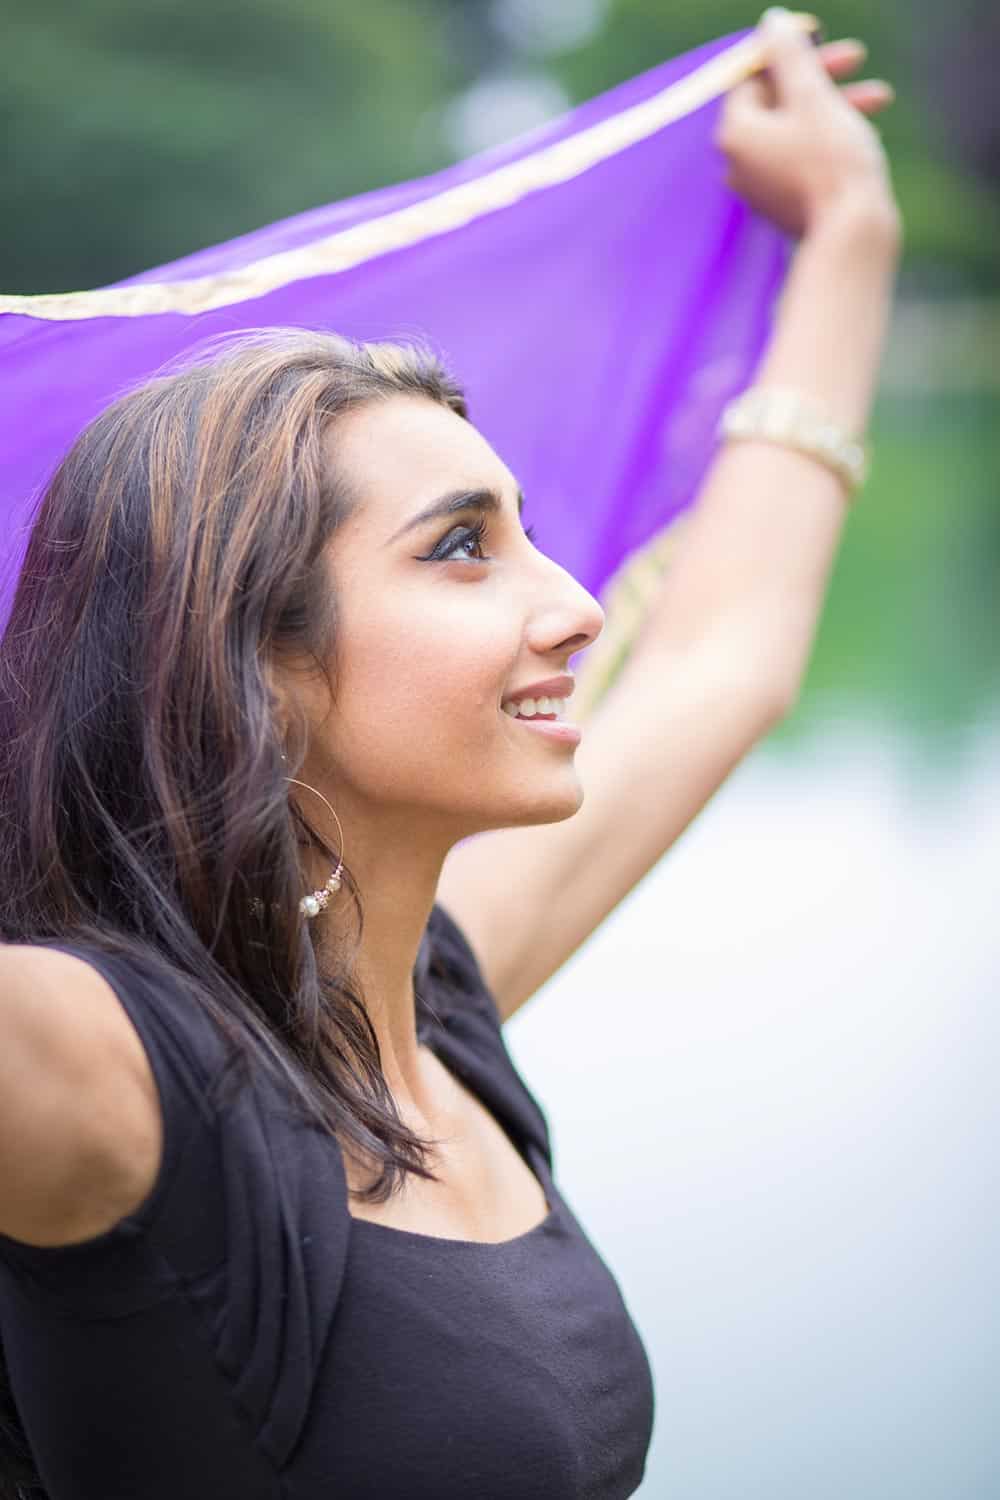 South Asian woman holding up colorful scarf with her head lifted to the sky and a happy expression